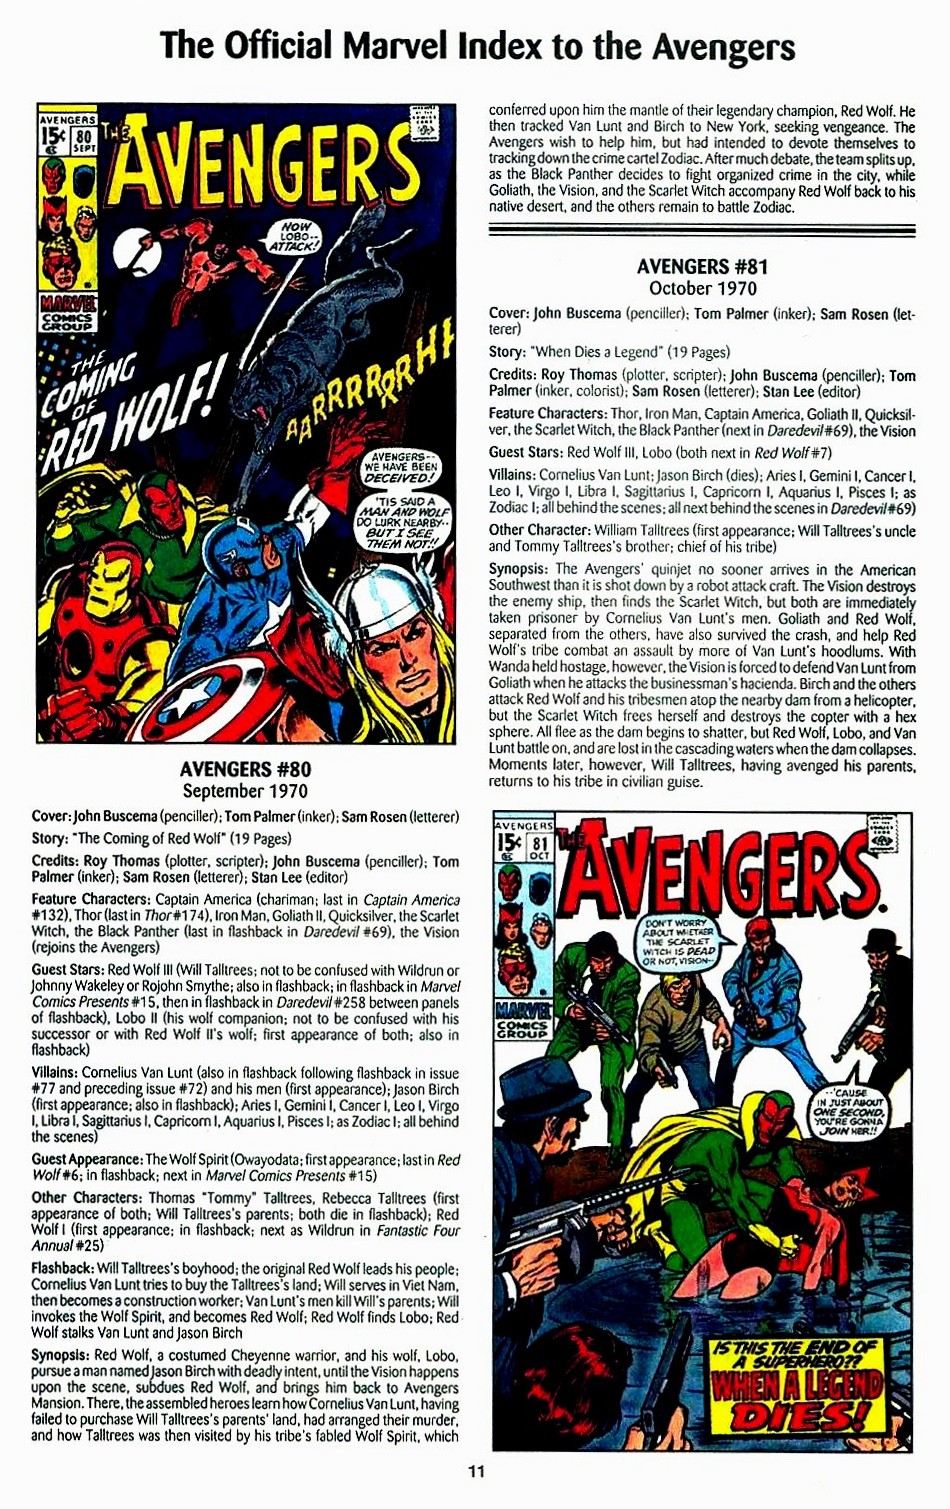 Read online The Official Marvel Index to the Avengers comic -  Issue #2 - 13